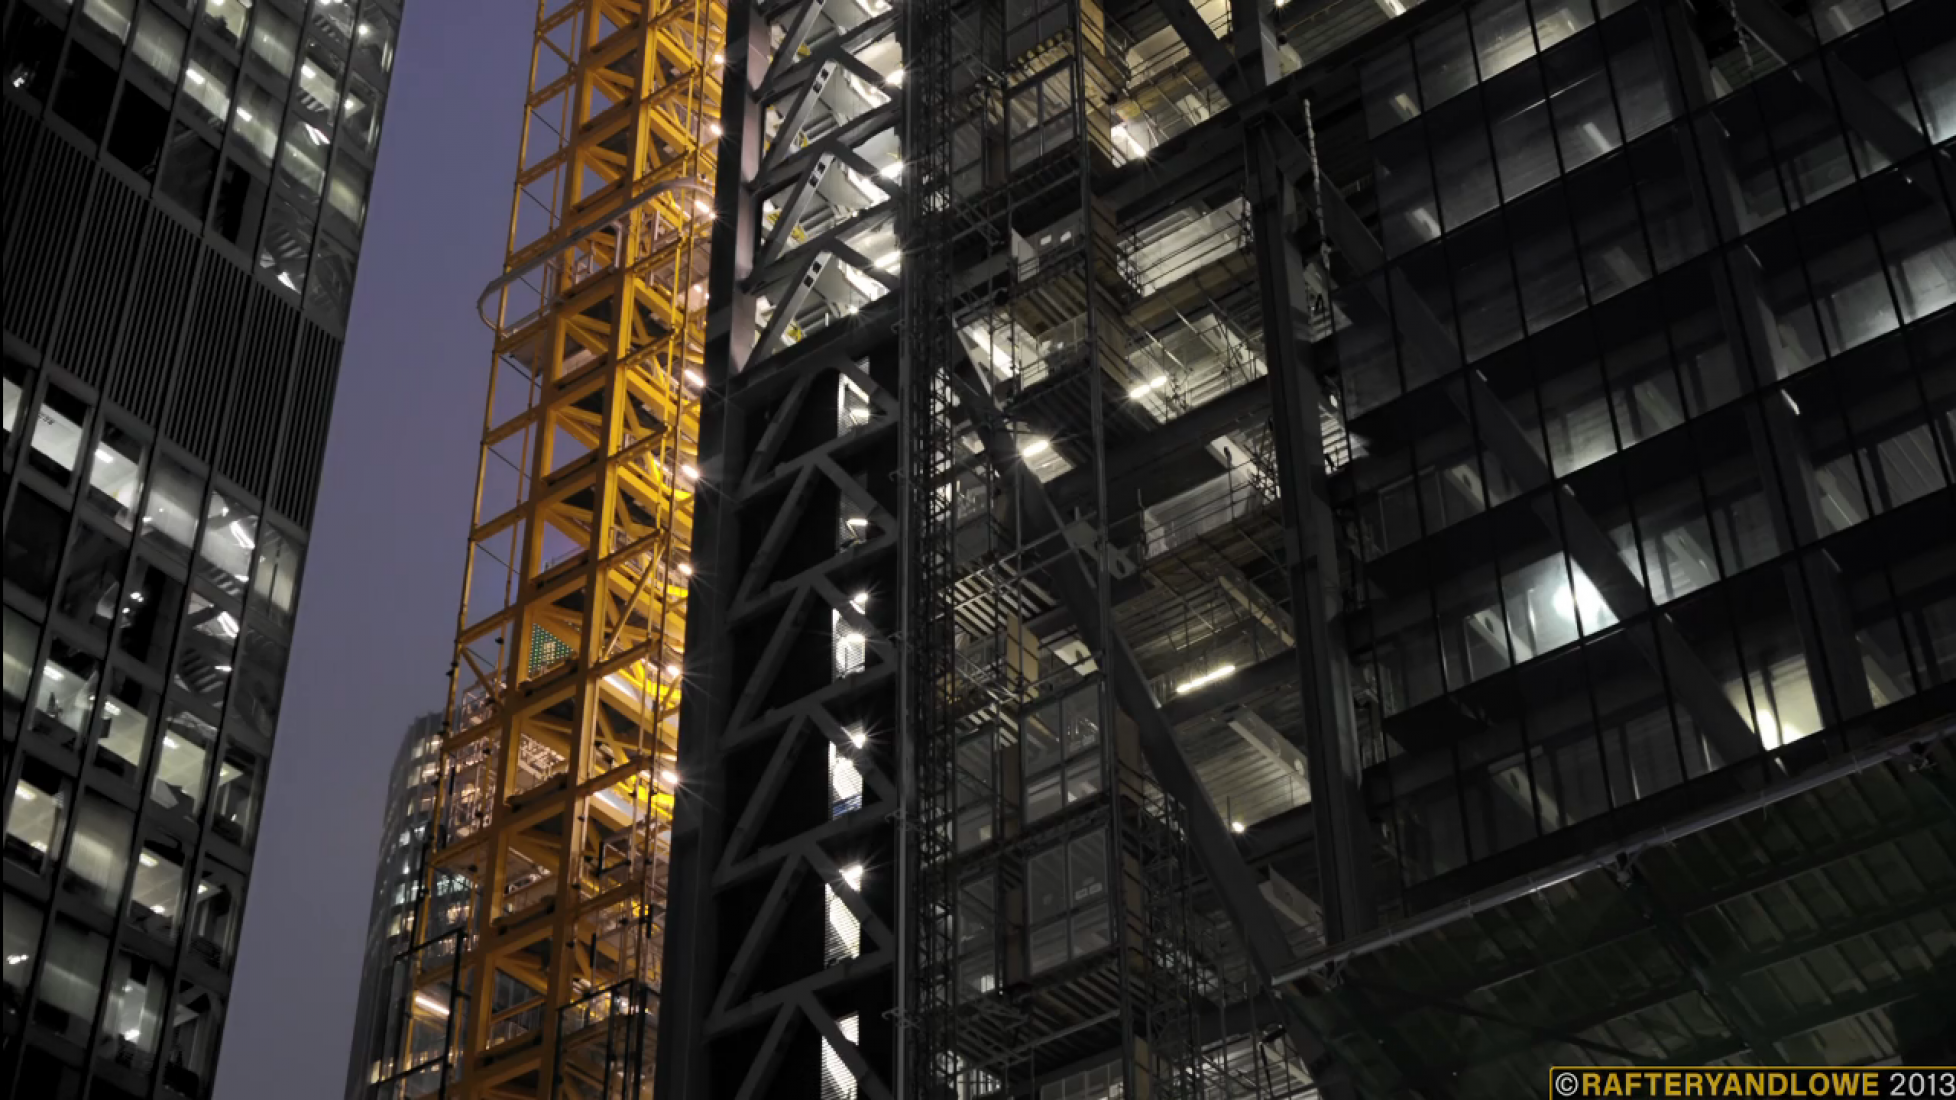 Making The Leadenhall Building. By Paul Raftery and Dan Lowe. All images screenshot